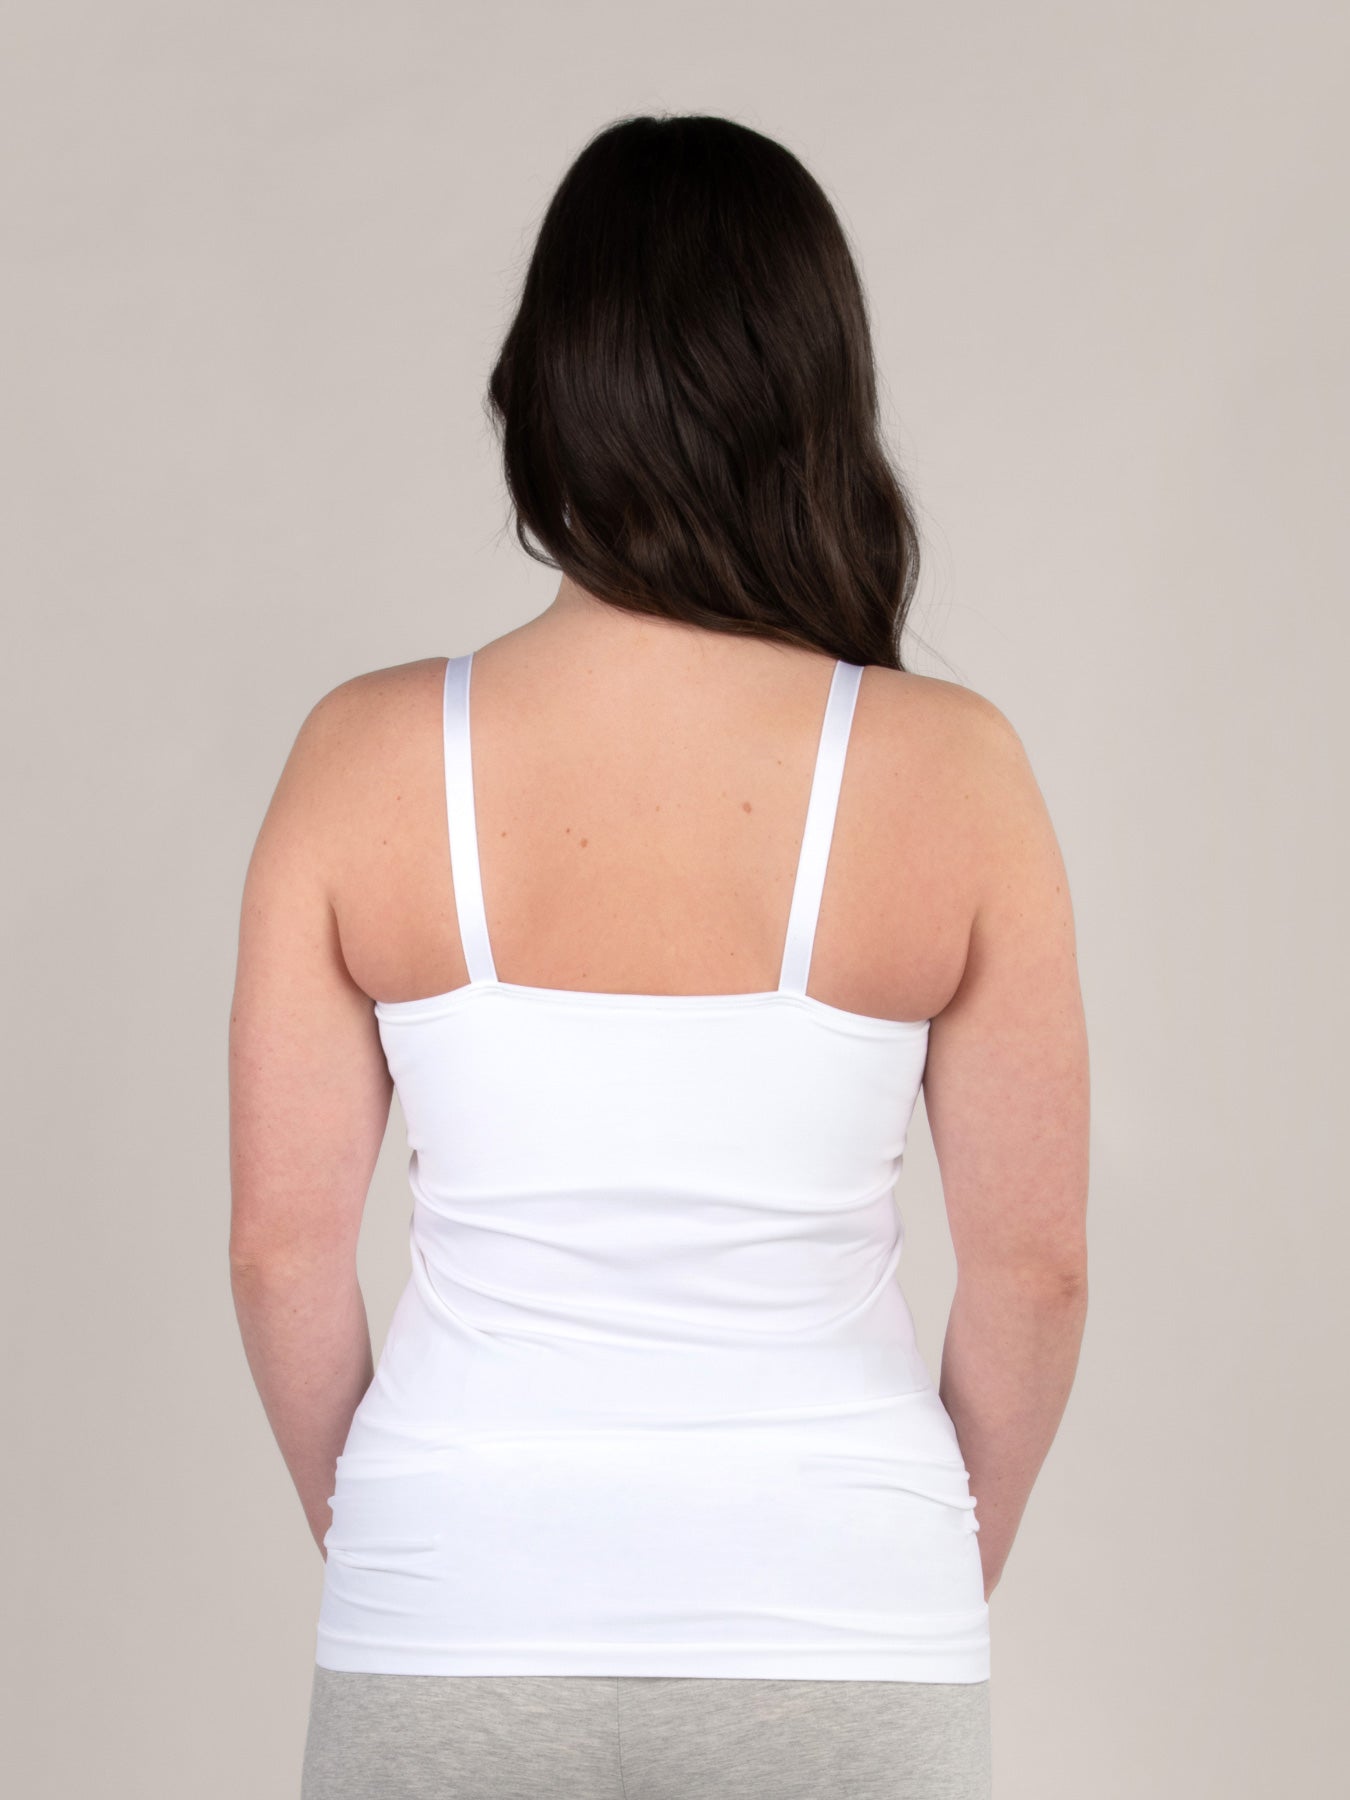 Little Angels - Carriwell seamless nursing control cami is the